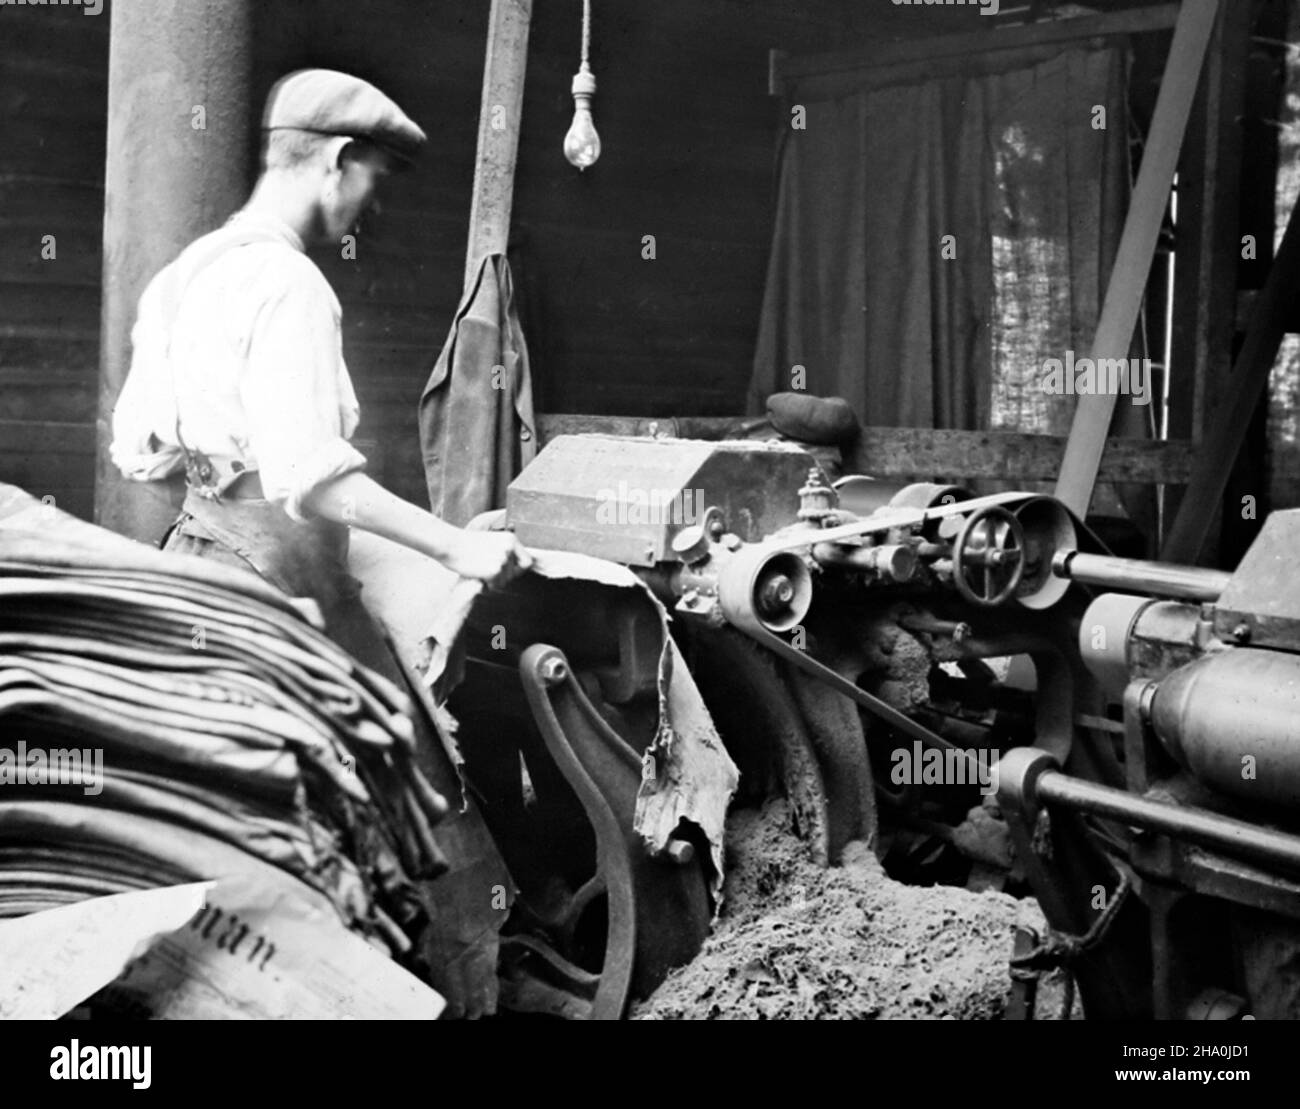 Shaving skins, leather production, Victorian period Stock Photo